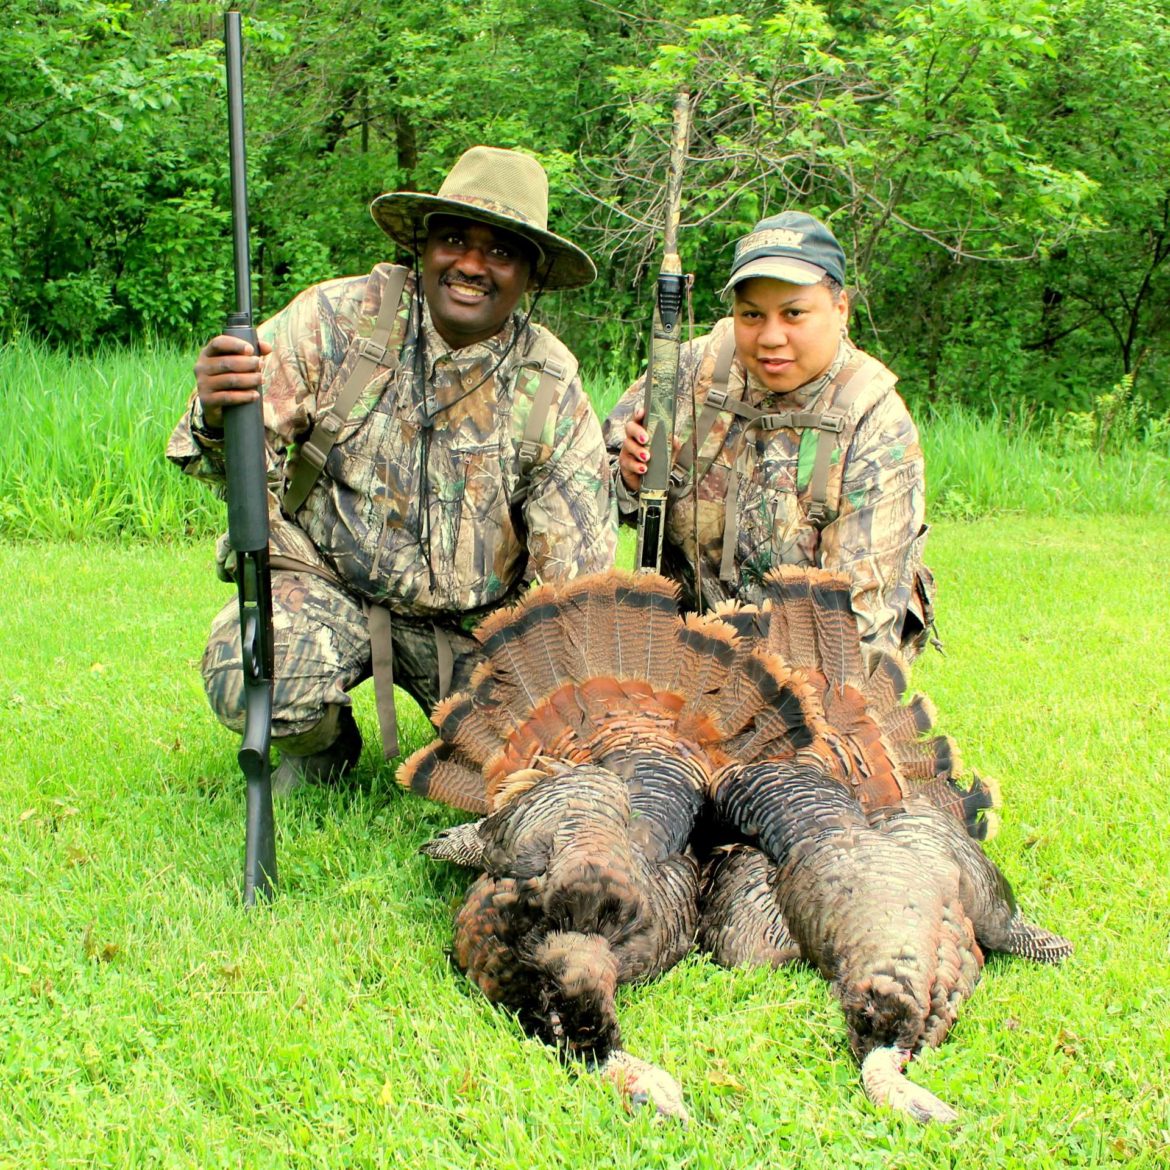 Wayne Hubbard and Candice Price with recently shot turkeys.